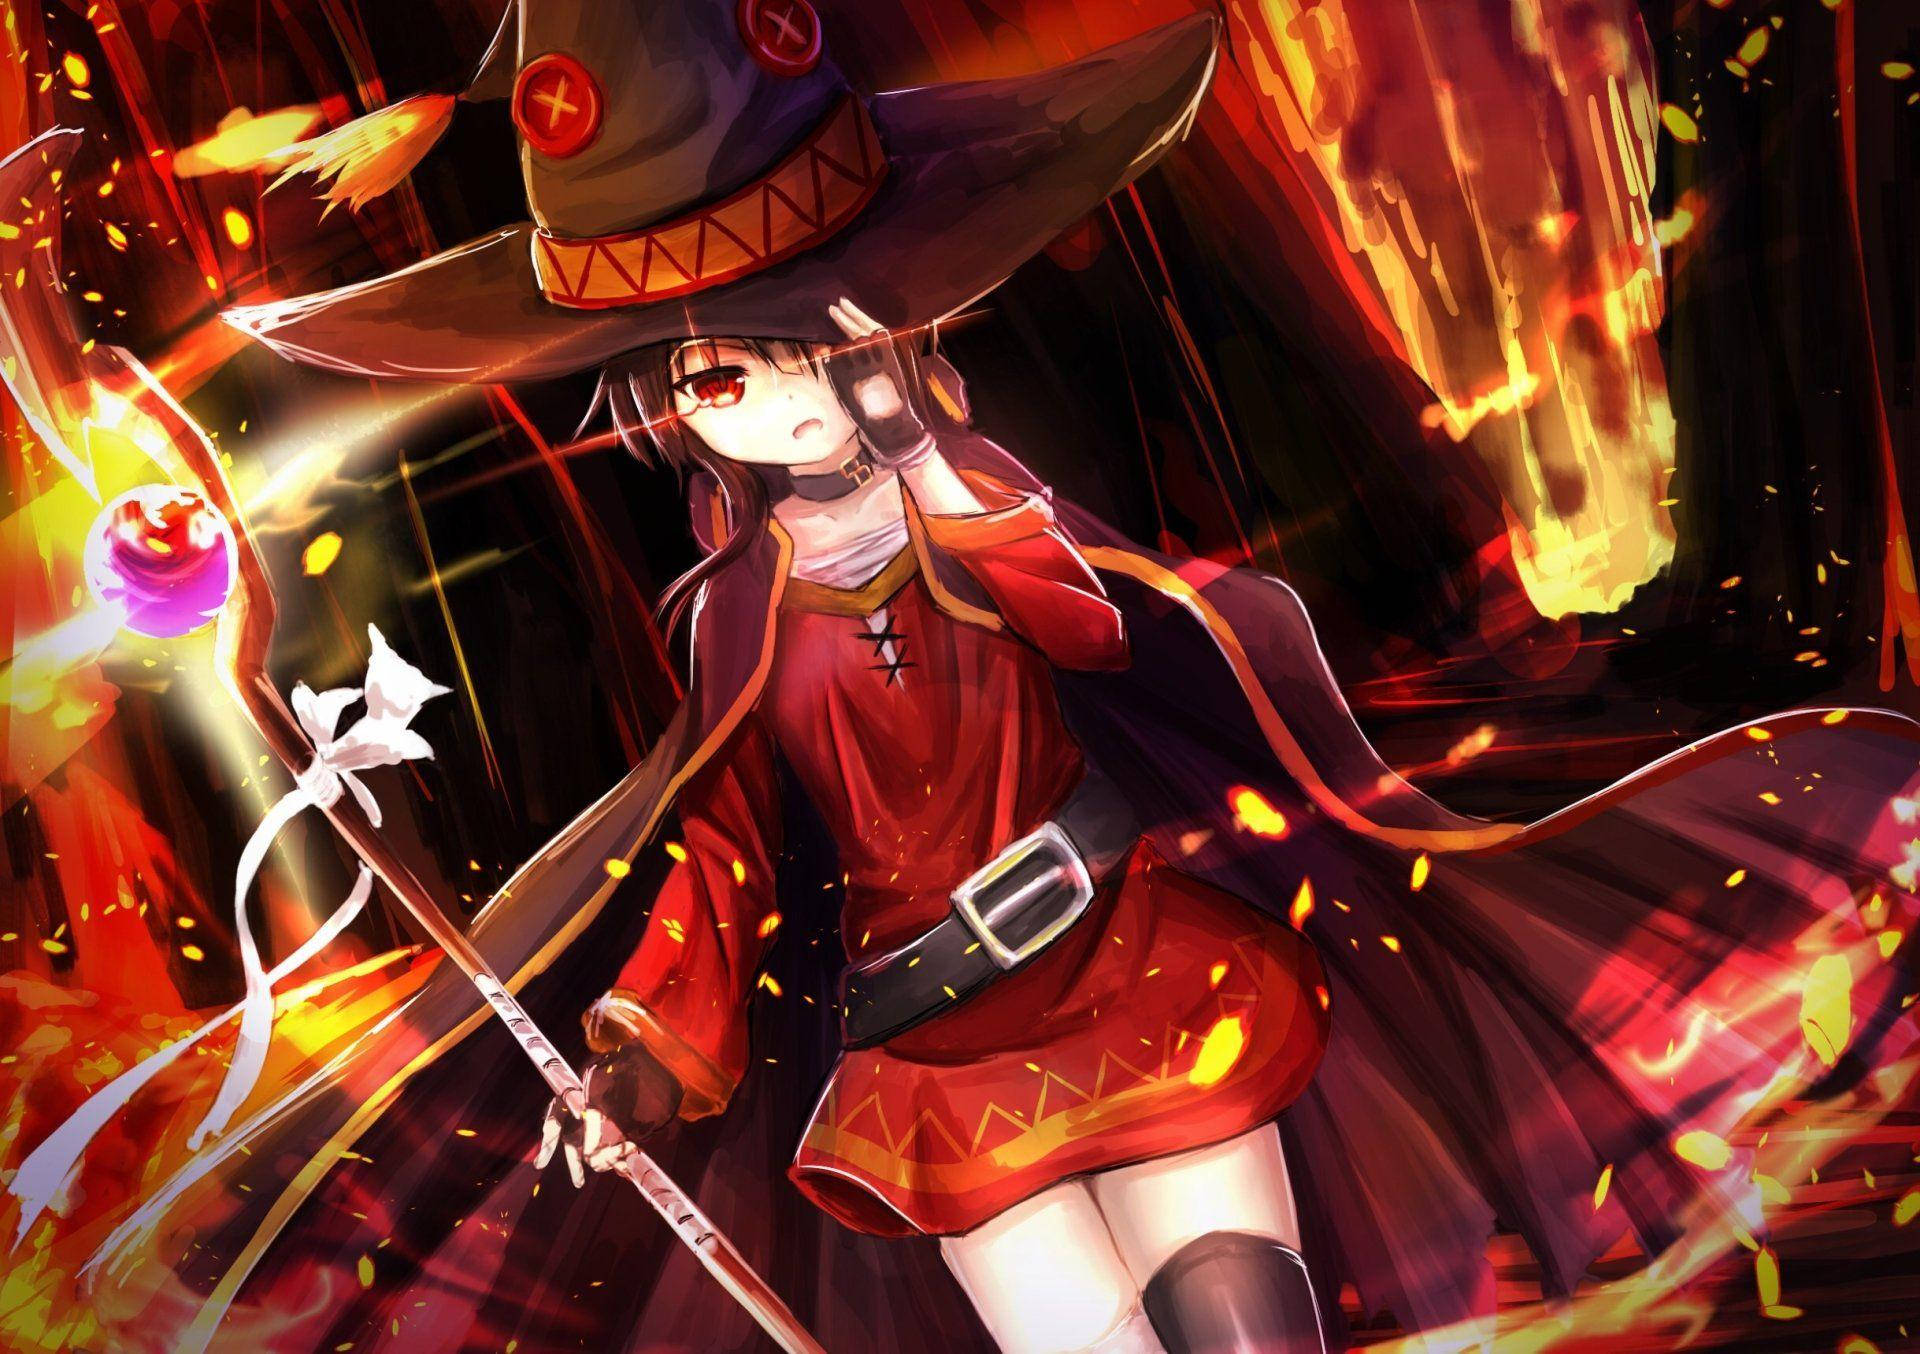 Megumin On A Mission - Explosive Magic In Action! Wallpaper